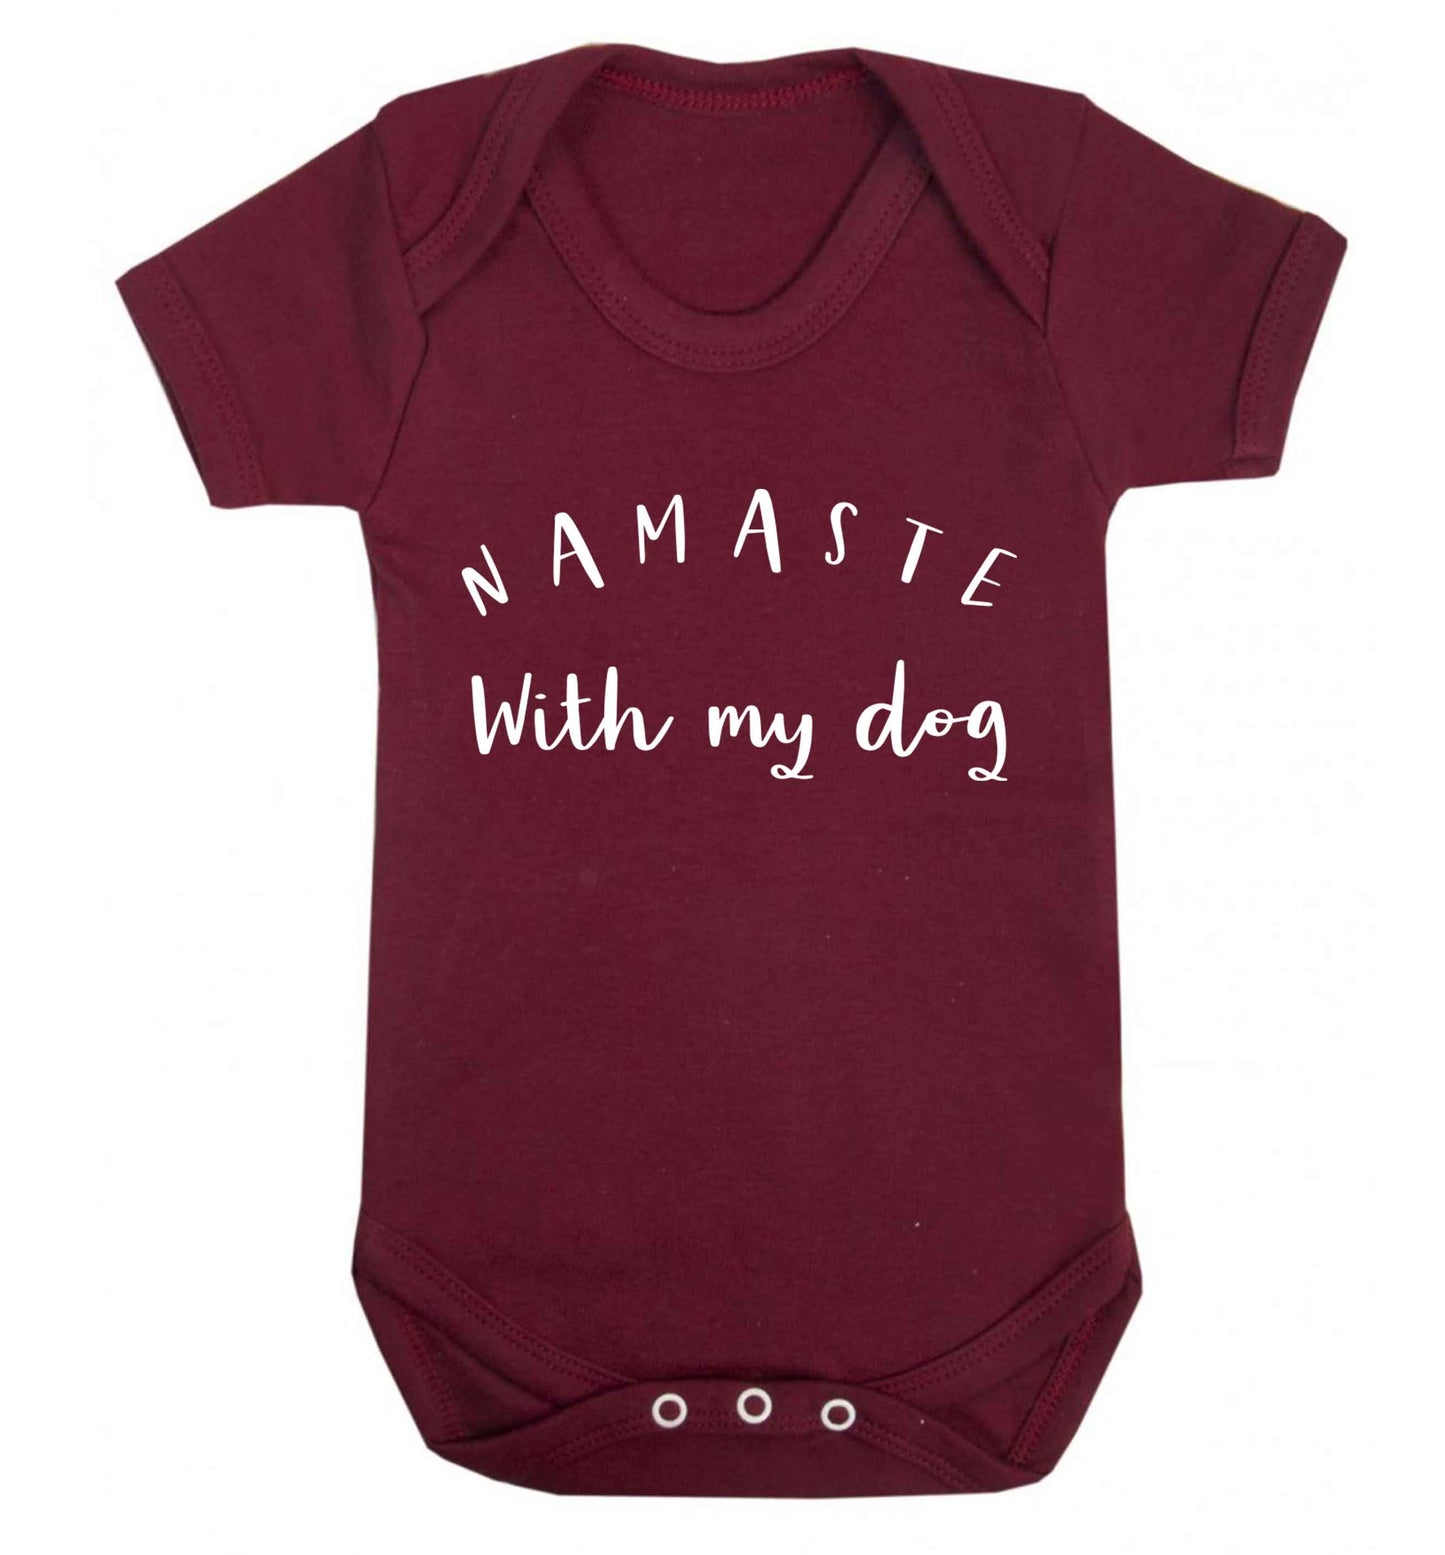 Namaste with my dog Baby Vest maroon 18-24 months